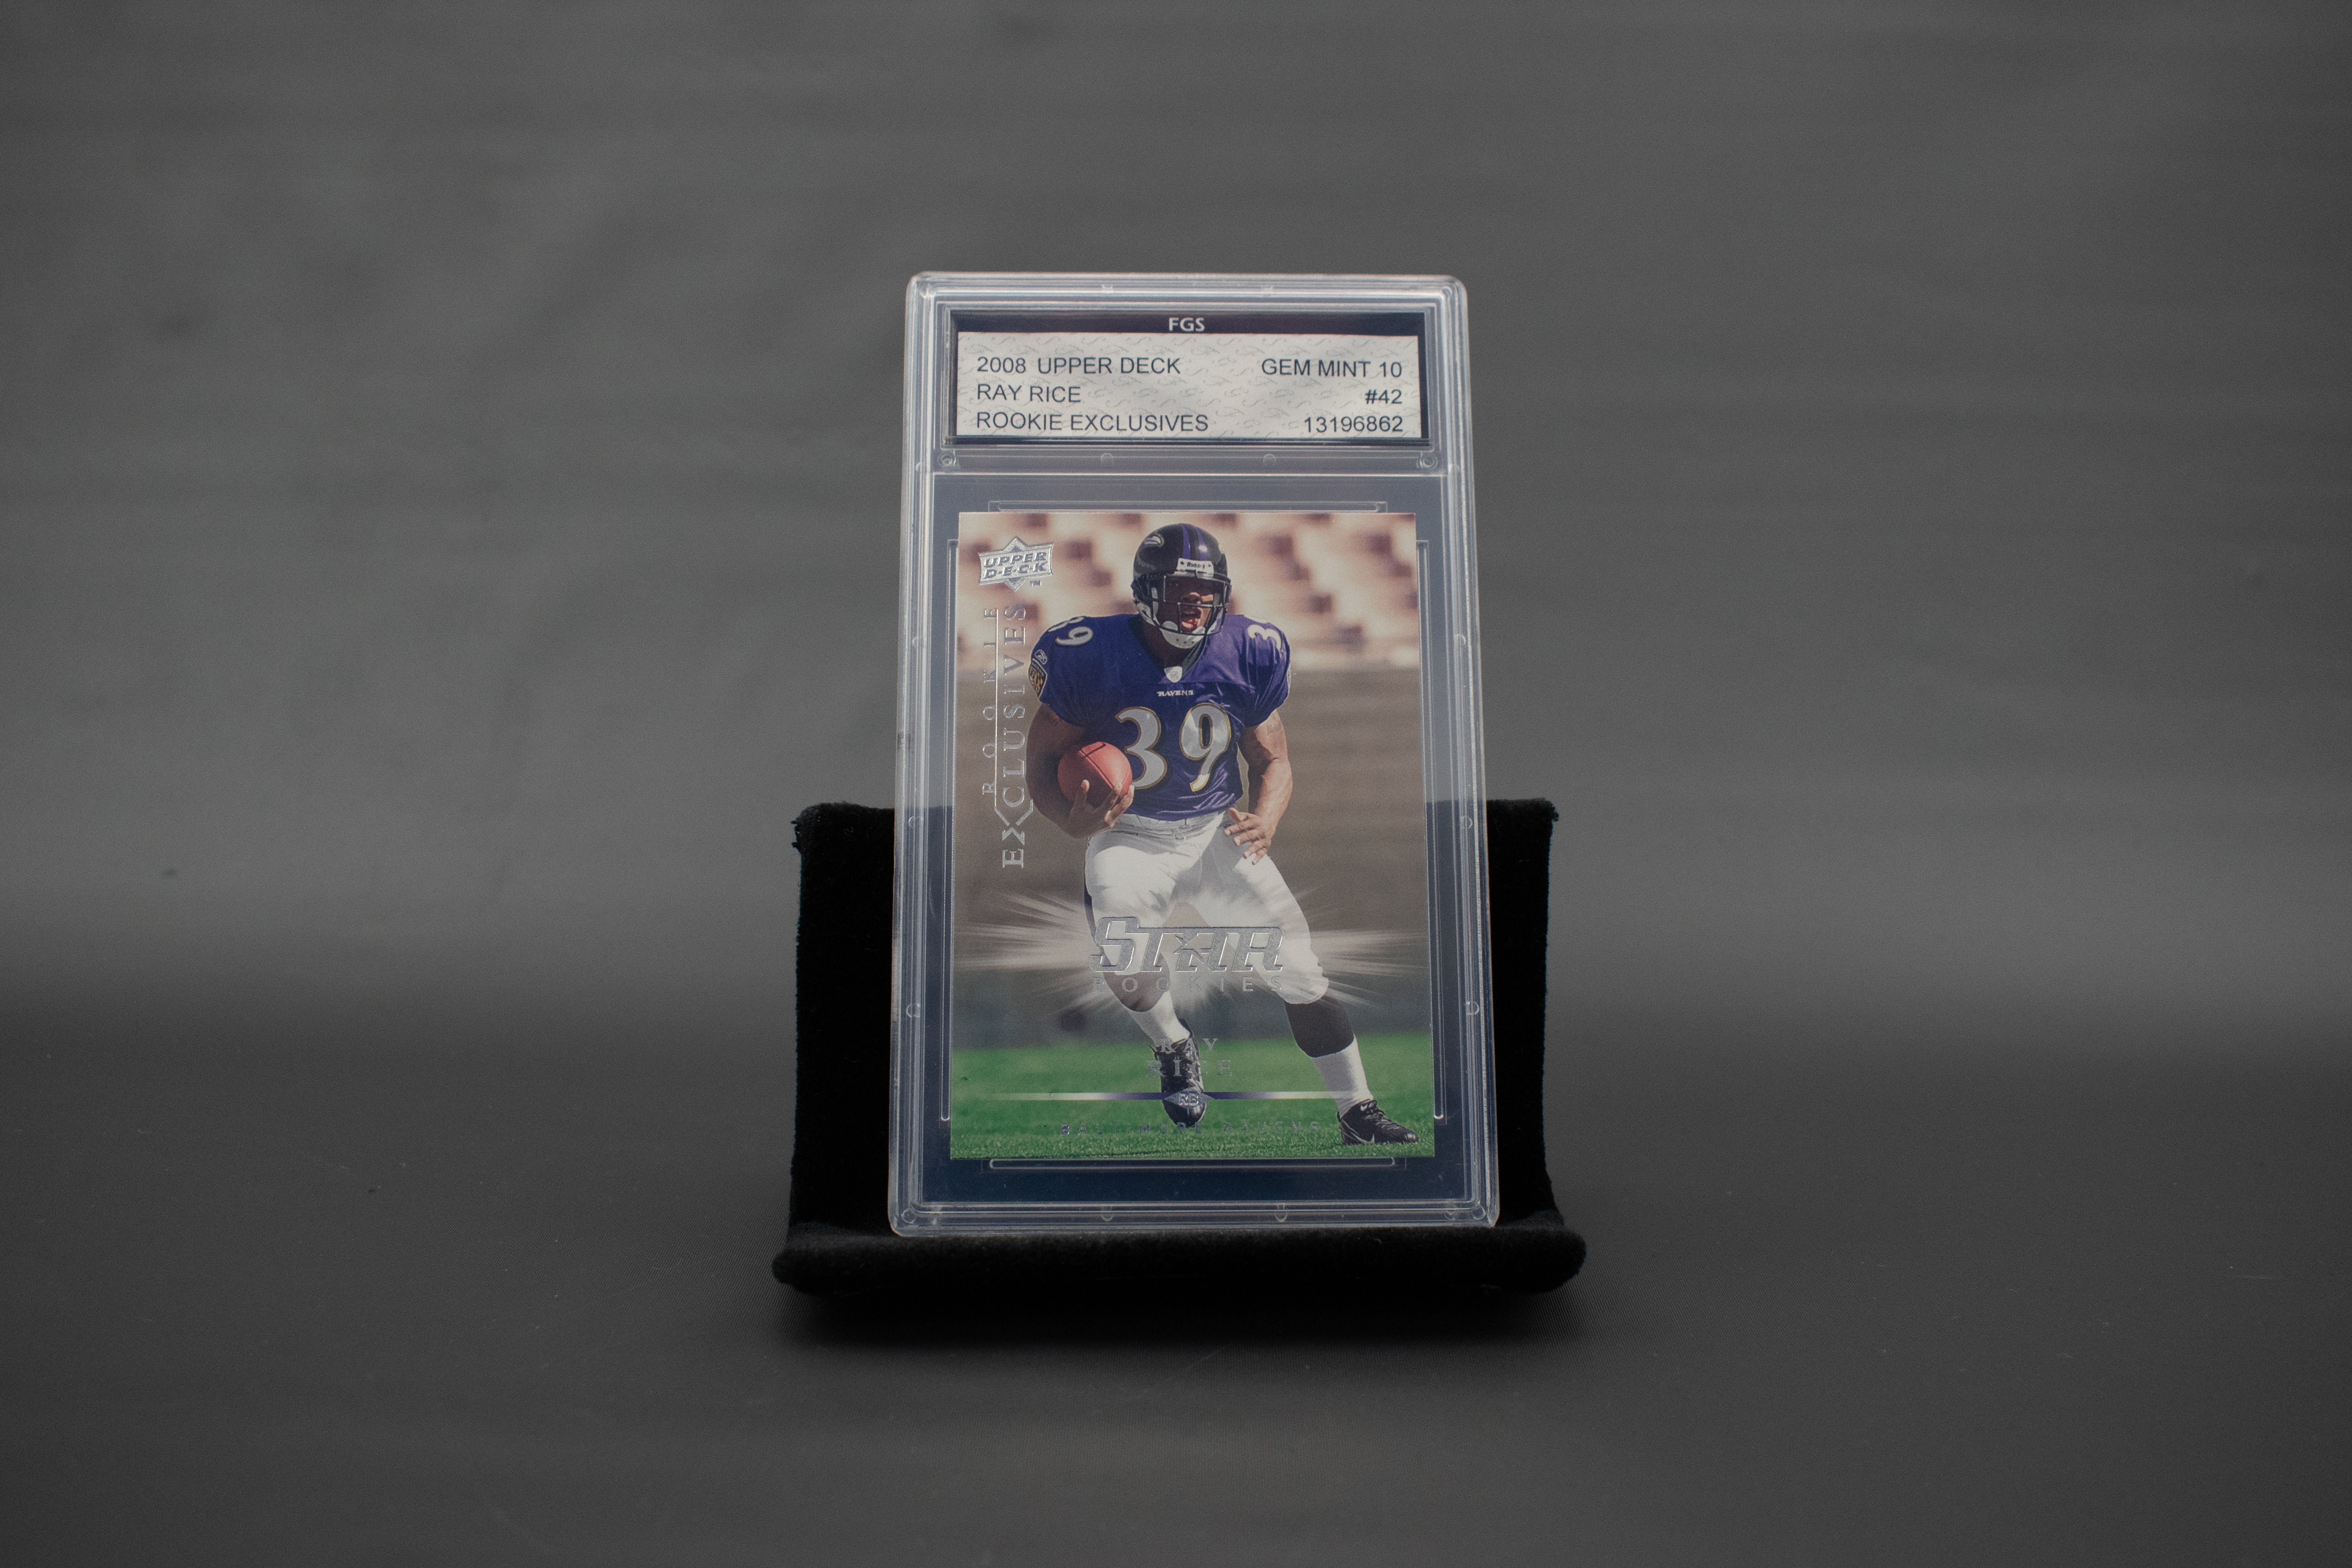 Ray Rice Rookie Exclusives 2008 Upper Deck GEM MINT 10 RE42 Baltimore Ravens